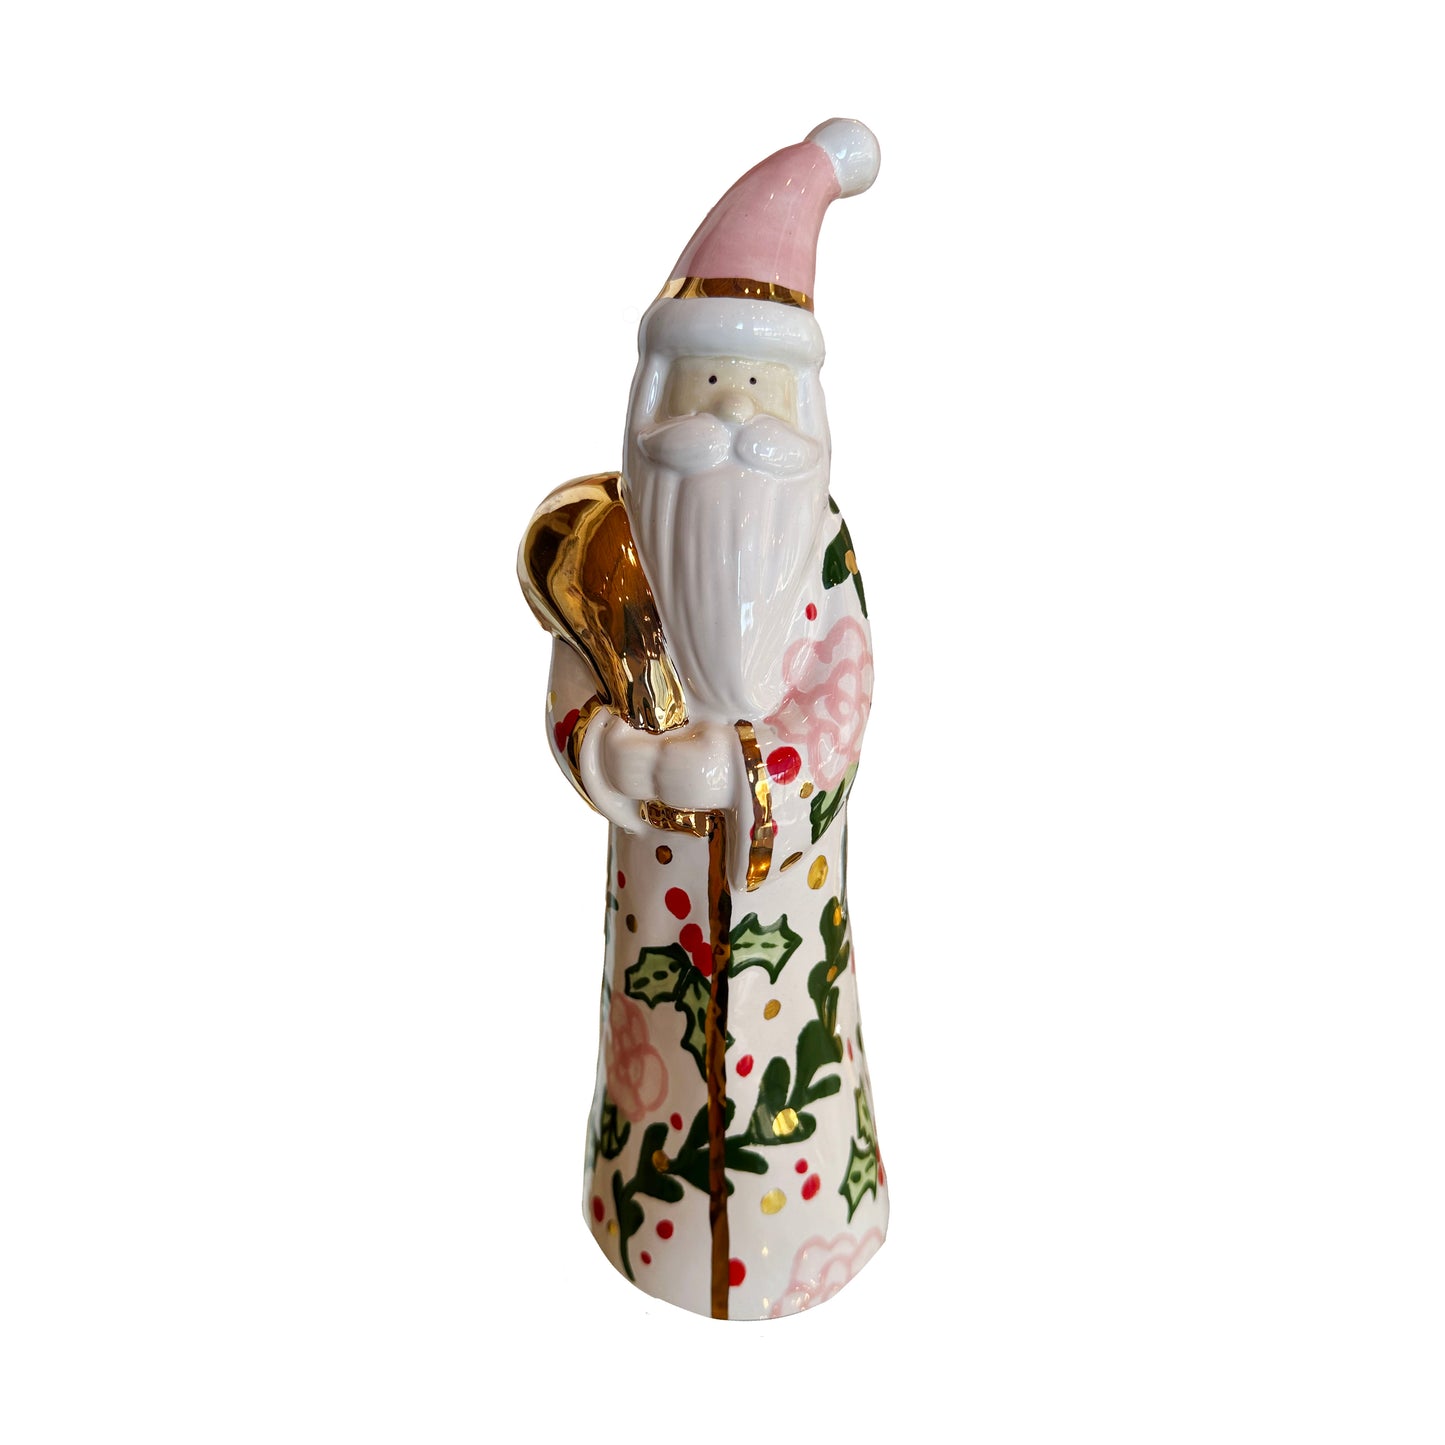 LIMITED! Hand Painted Holly and Floral Santa with 22K Gold Accents